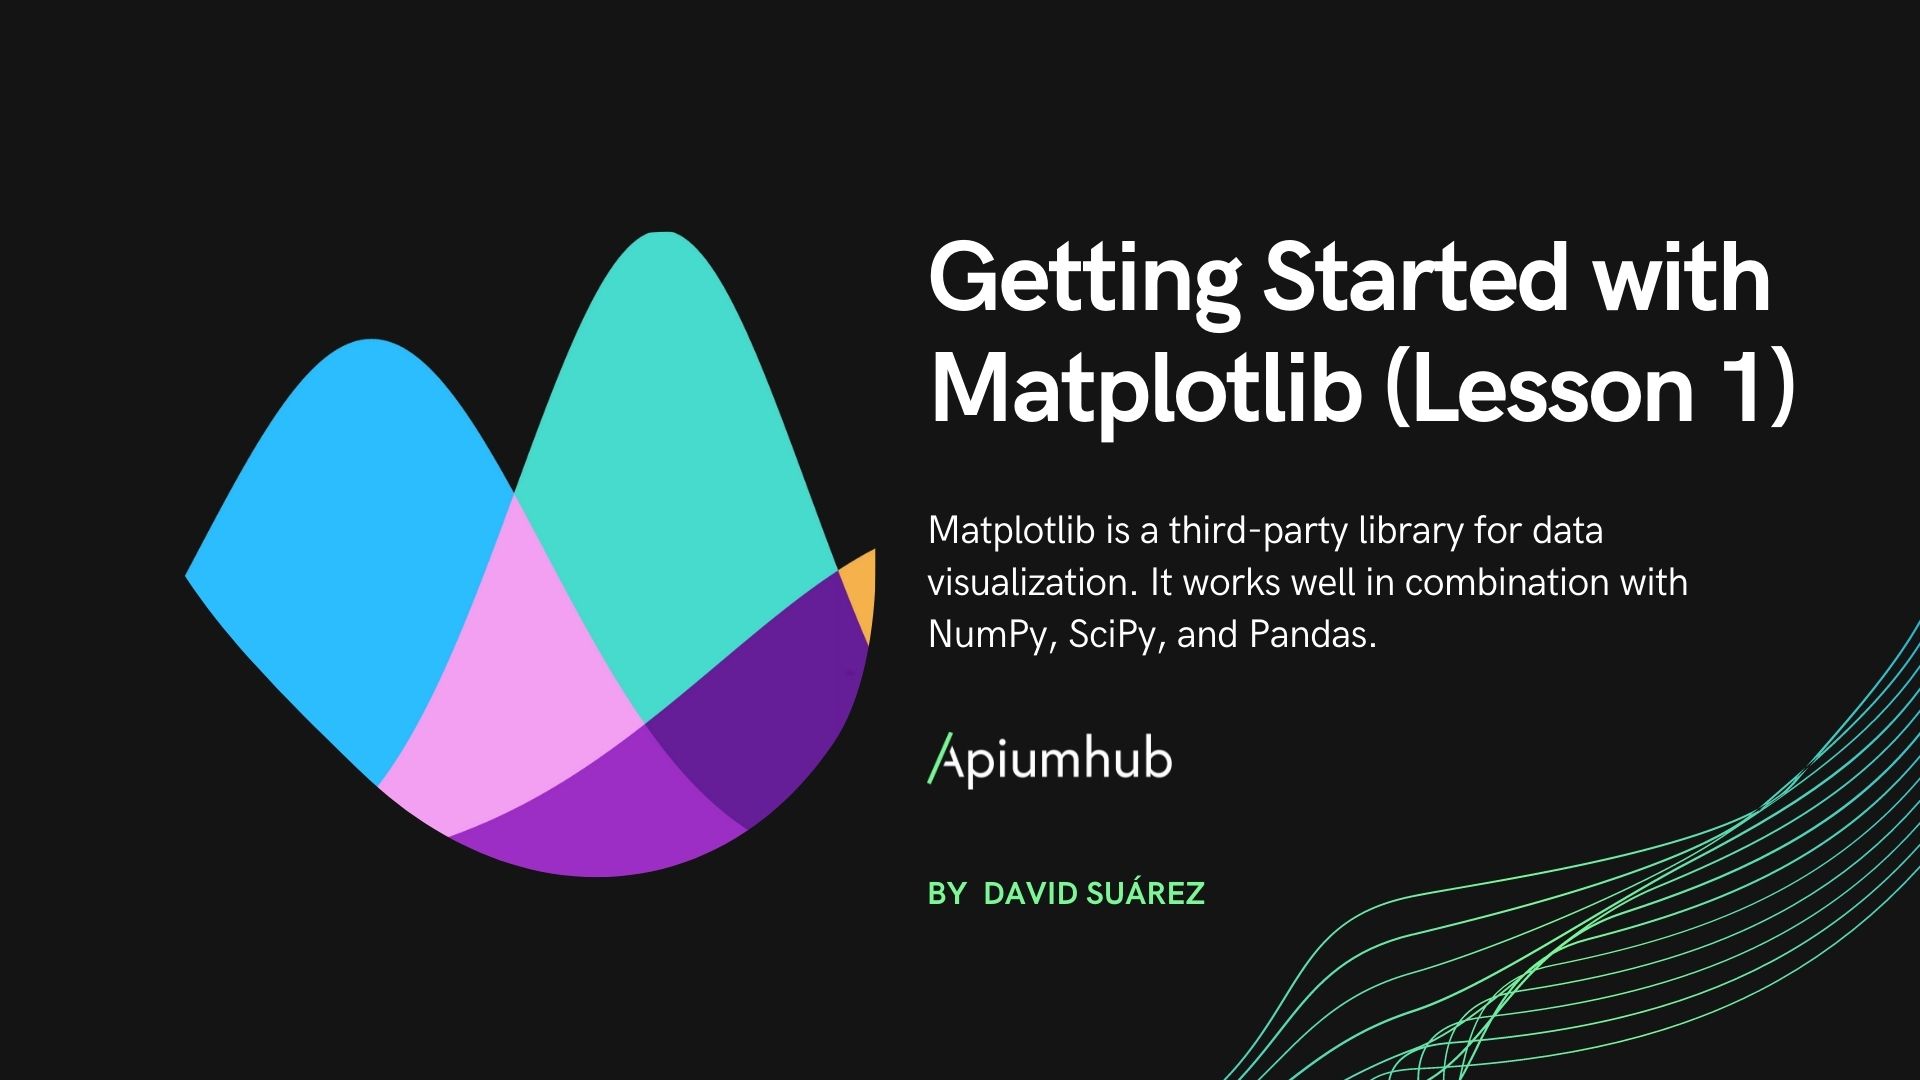 Getting Started with Matplotlib - Lesson 1